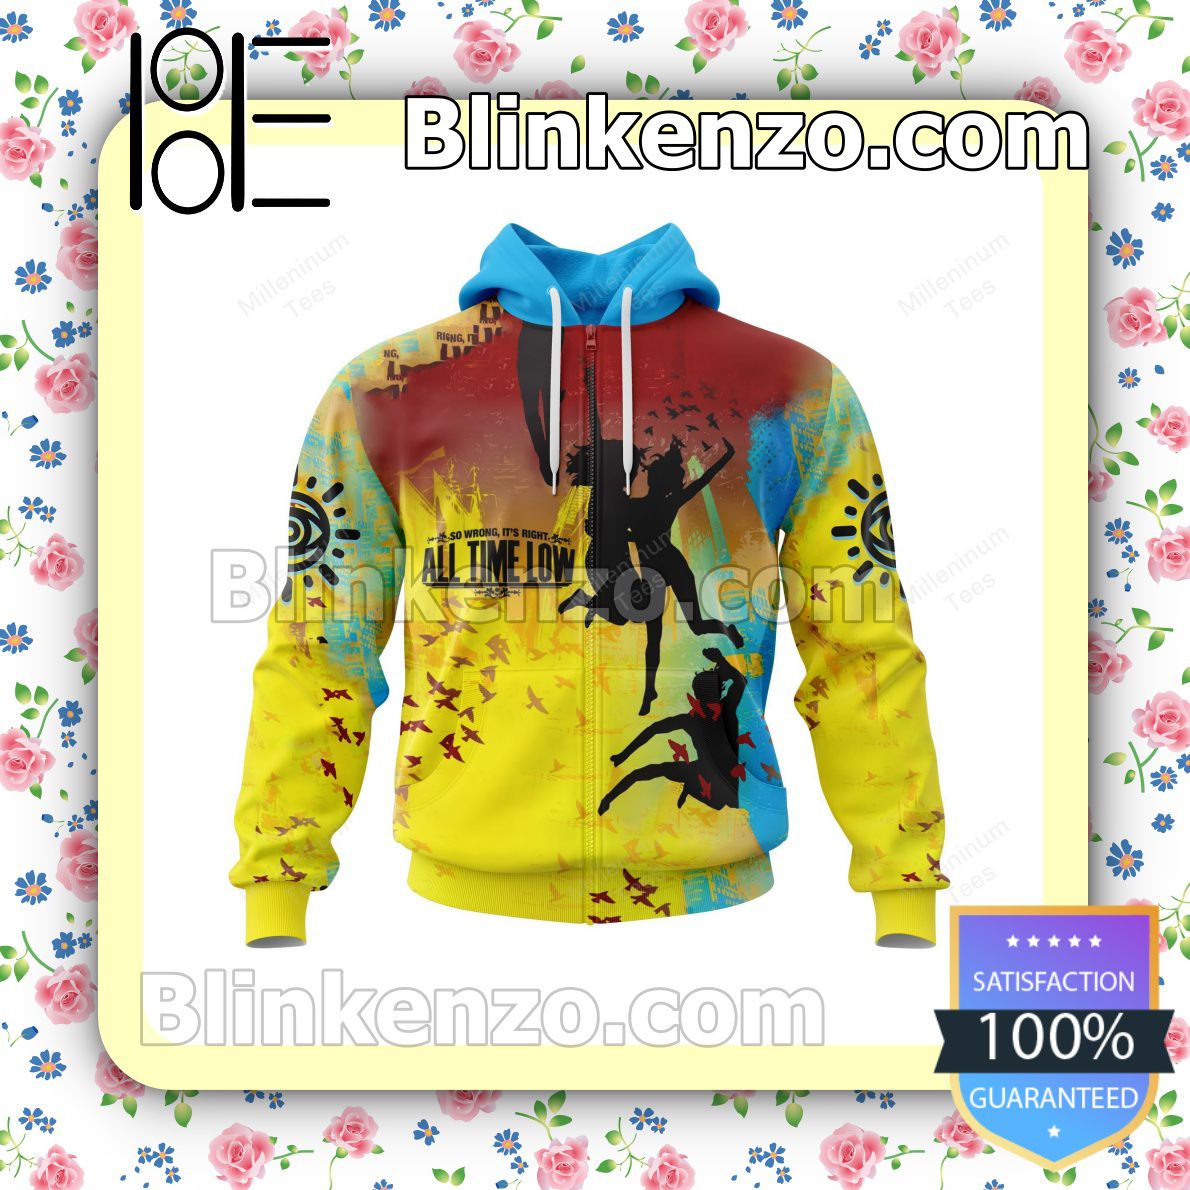 Personalized All Time Low So Wrong, It's Right Album Cover Hooded Sweatshirt